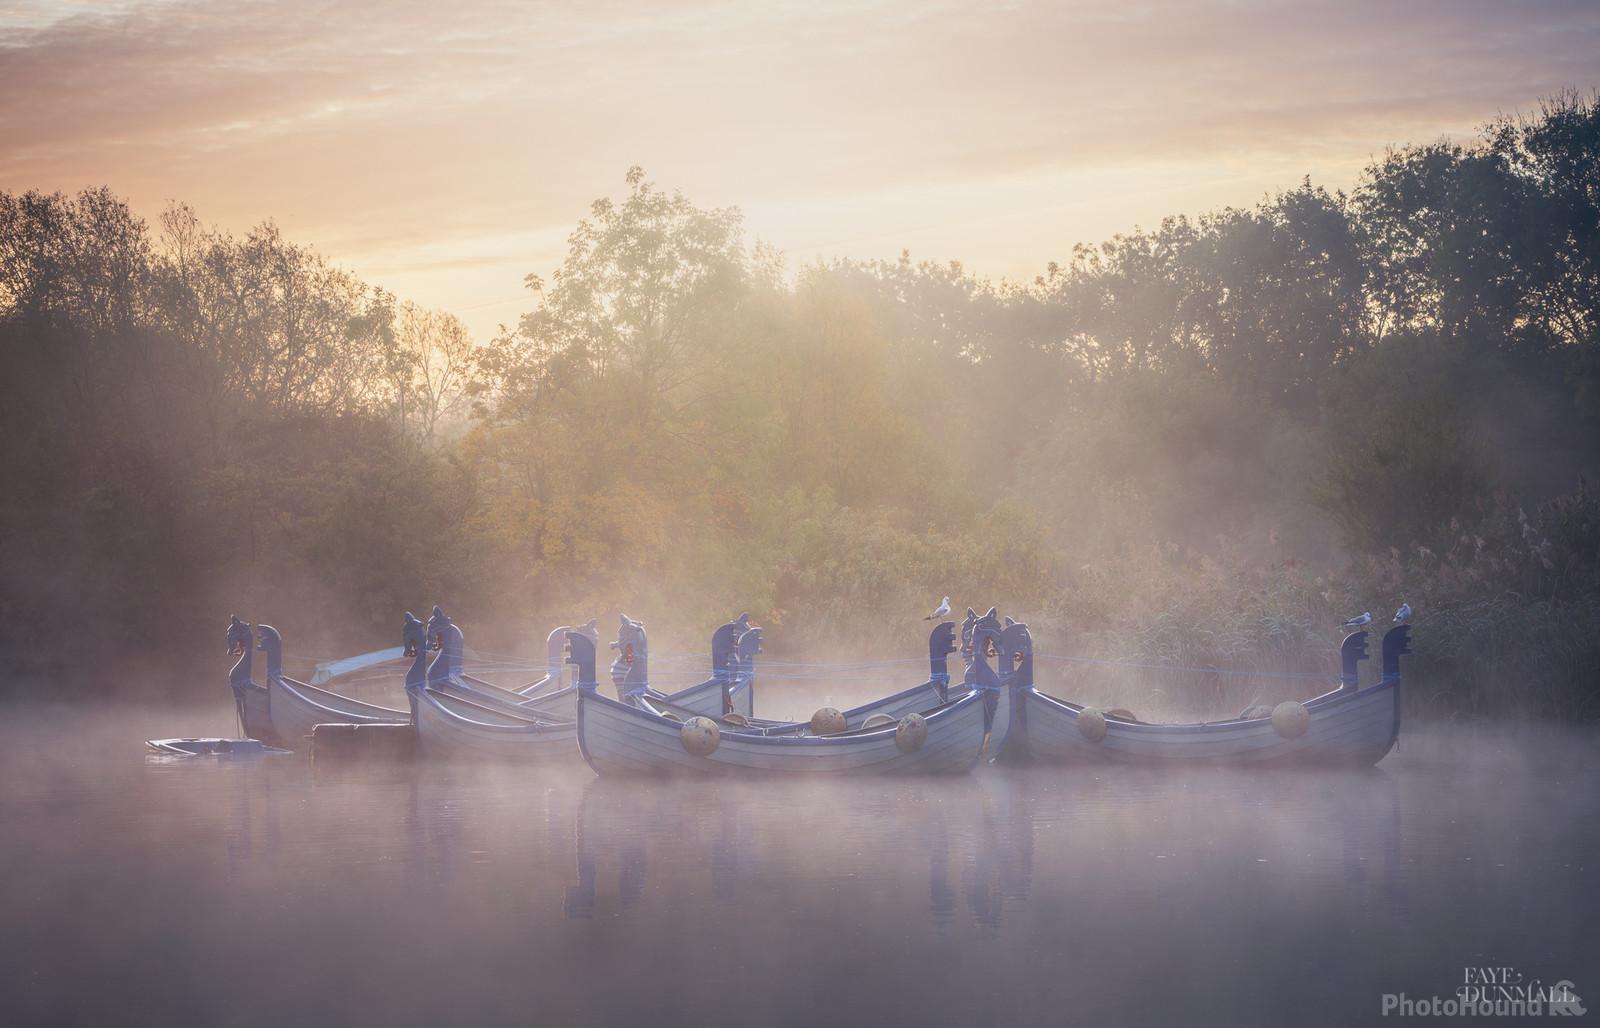 Image of Longholme Boating Lake by Faye Dunmall